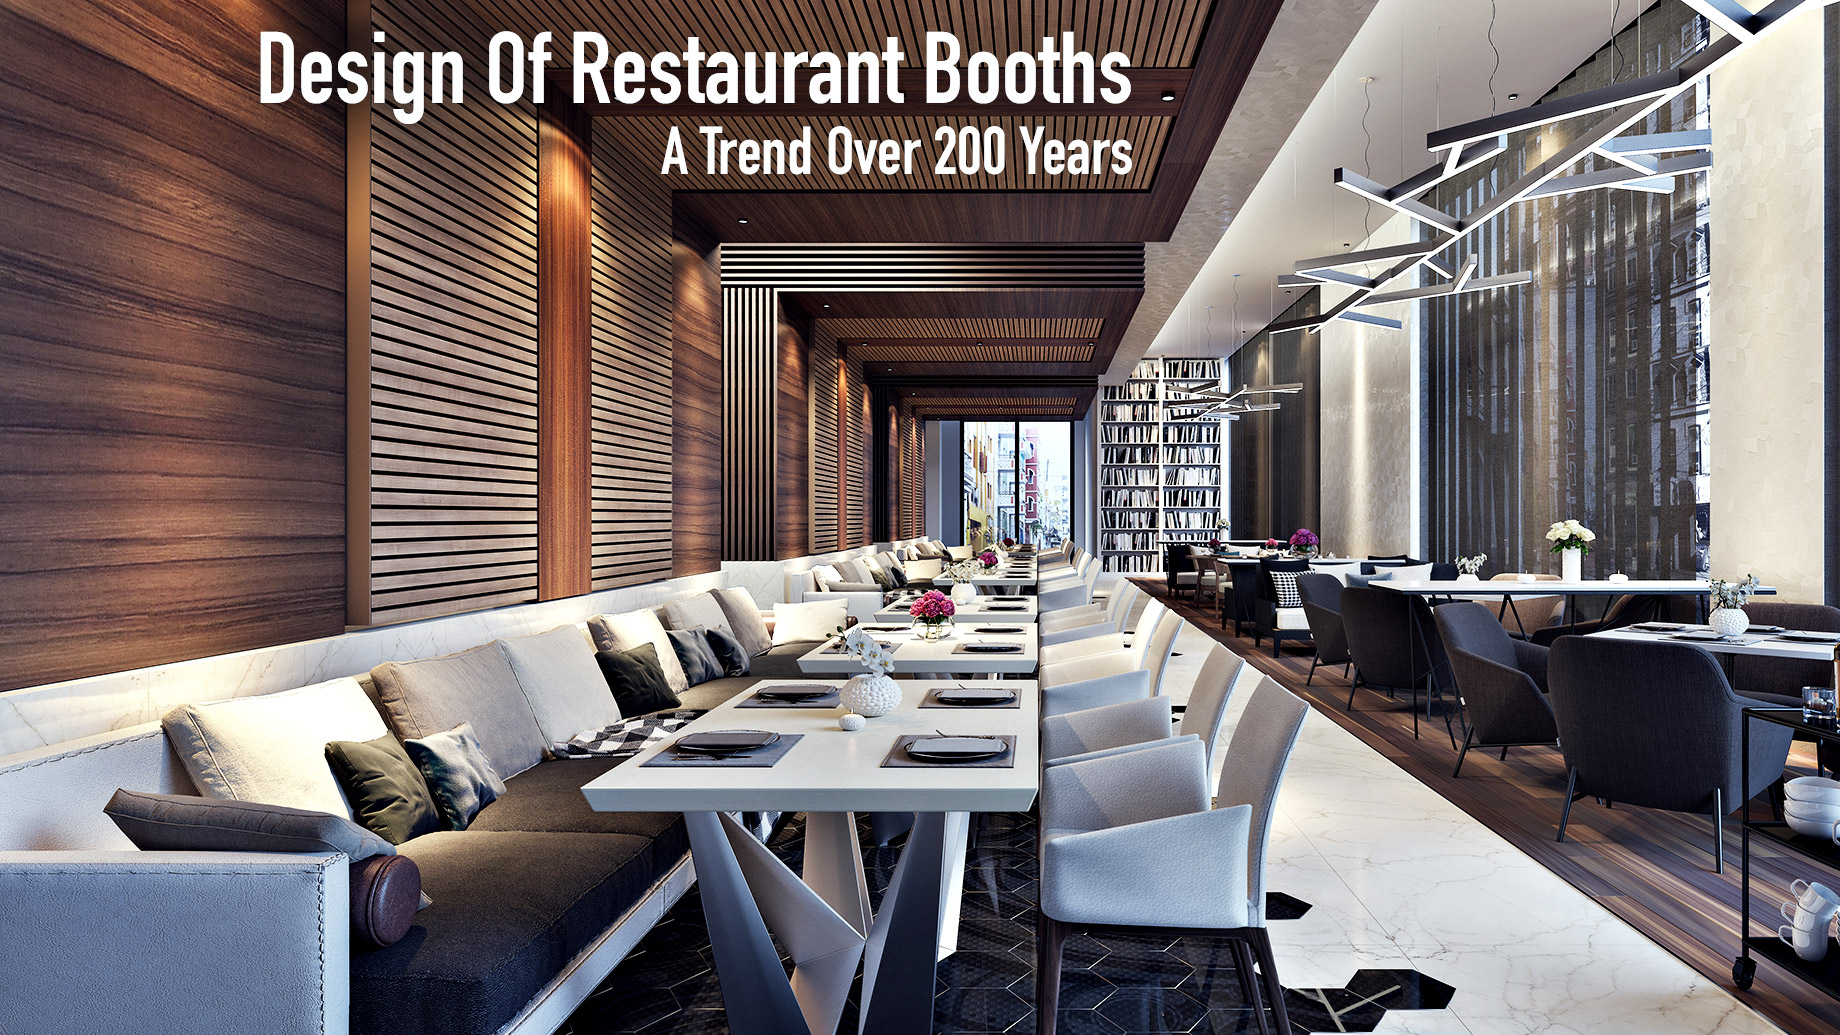 Design Of Restaurant Booths - A Trend Over 200 Years